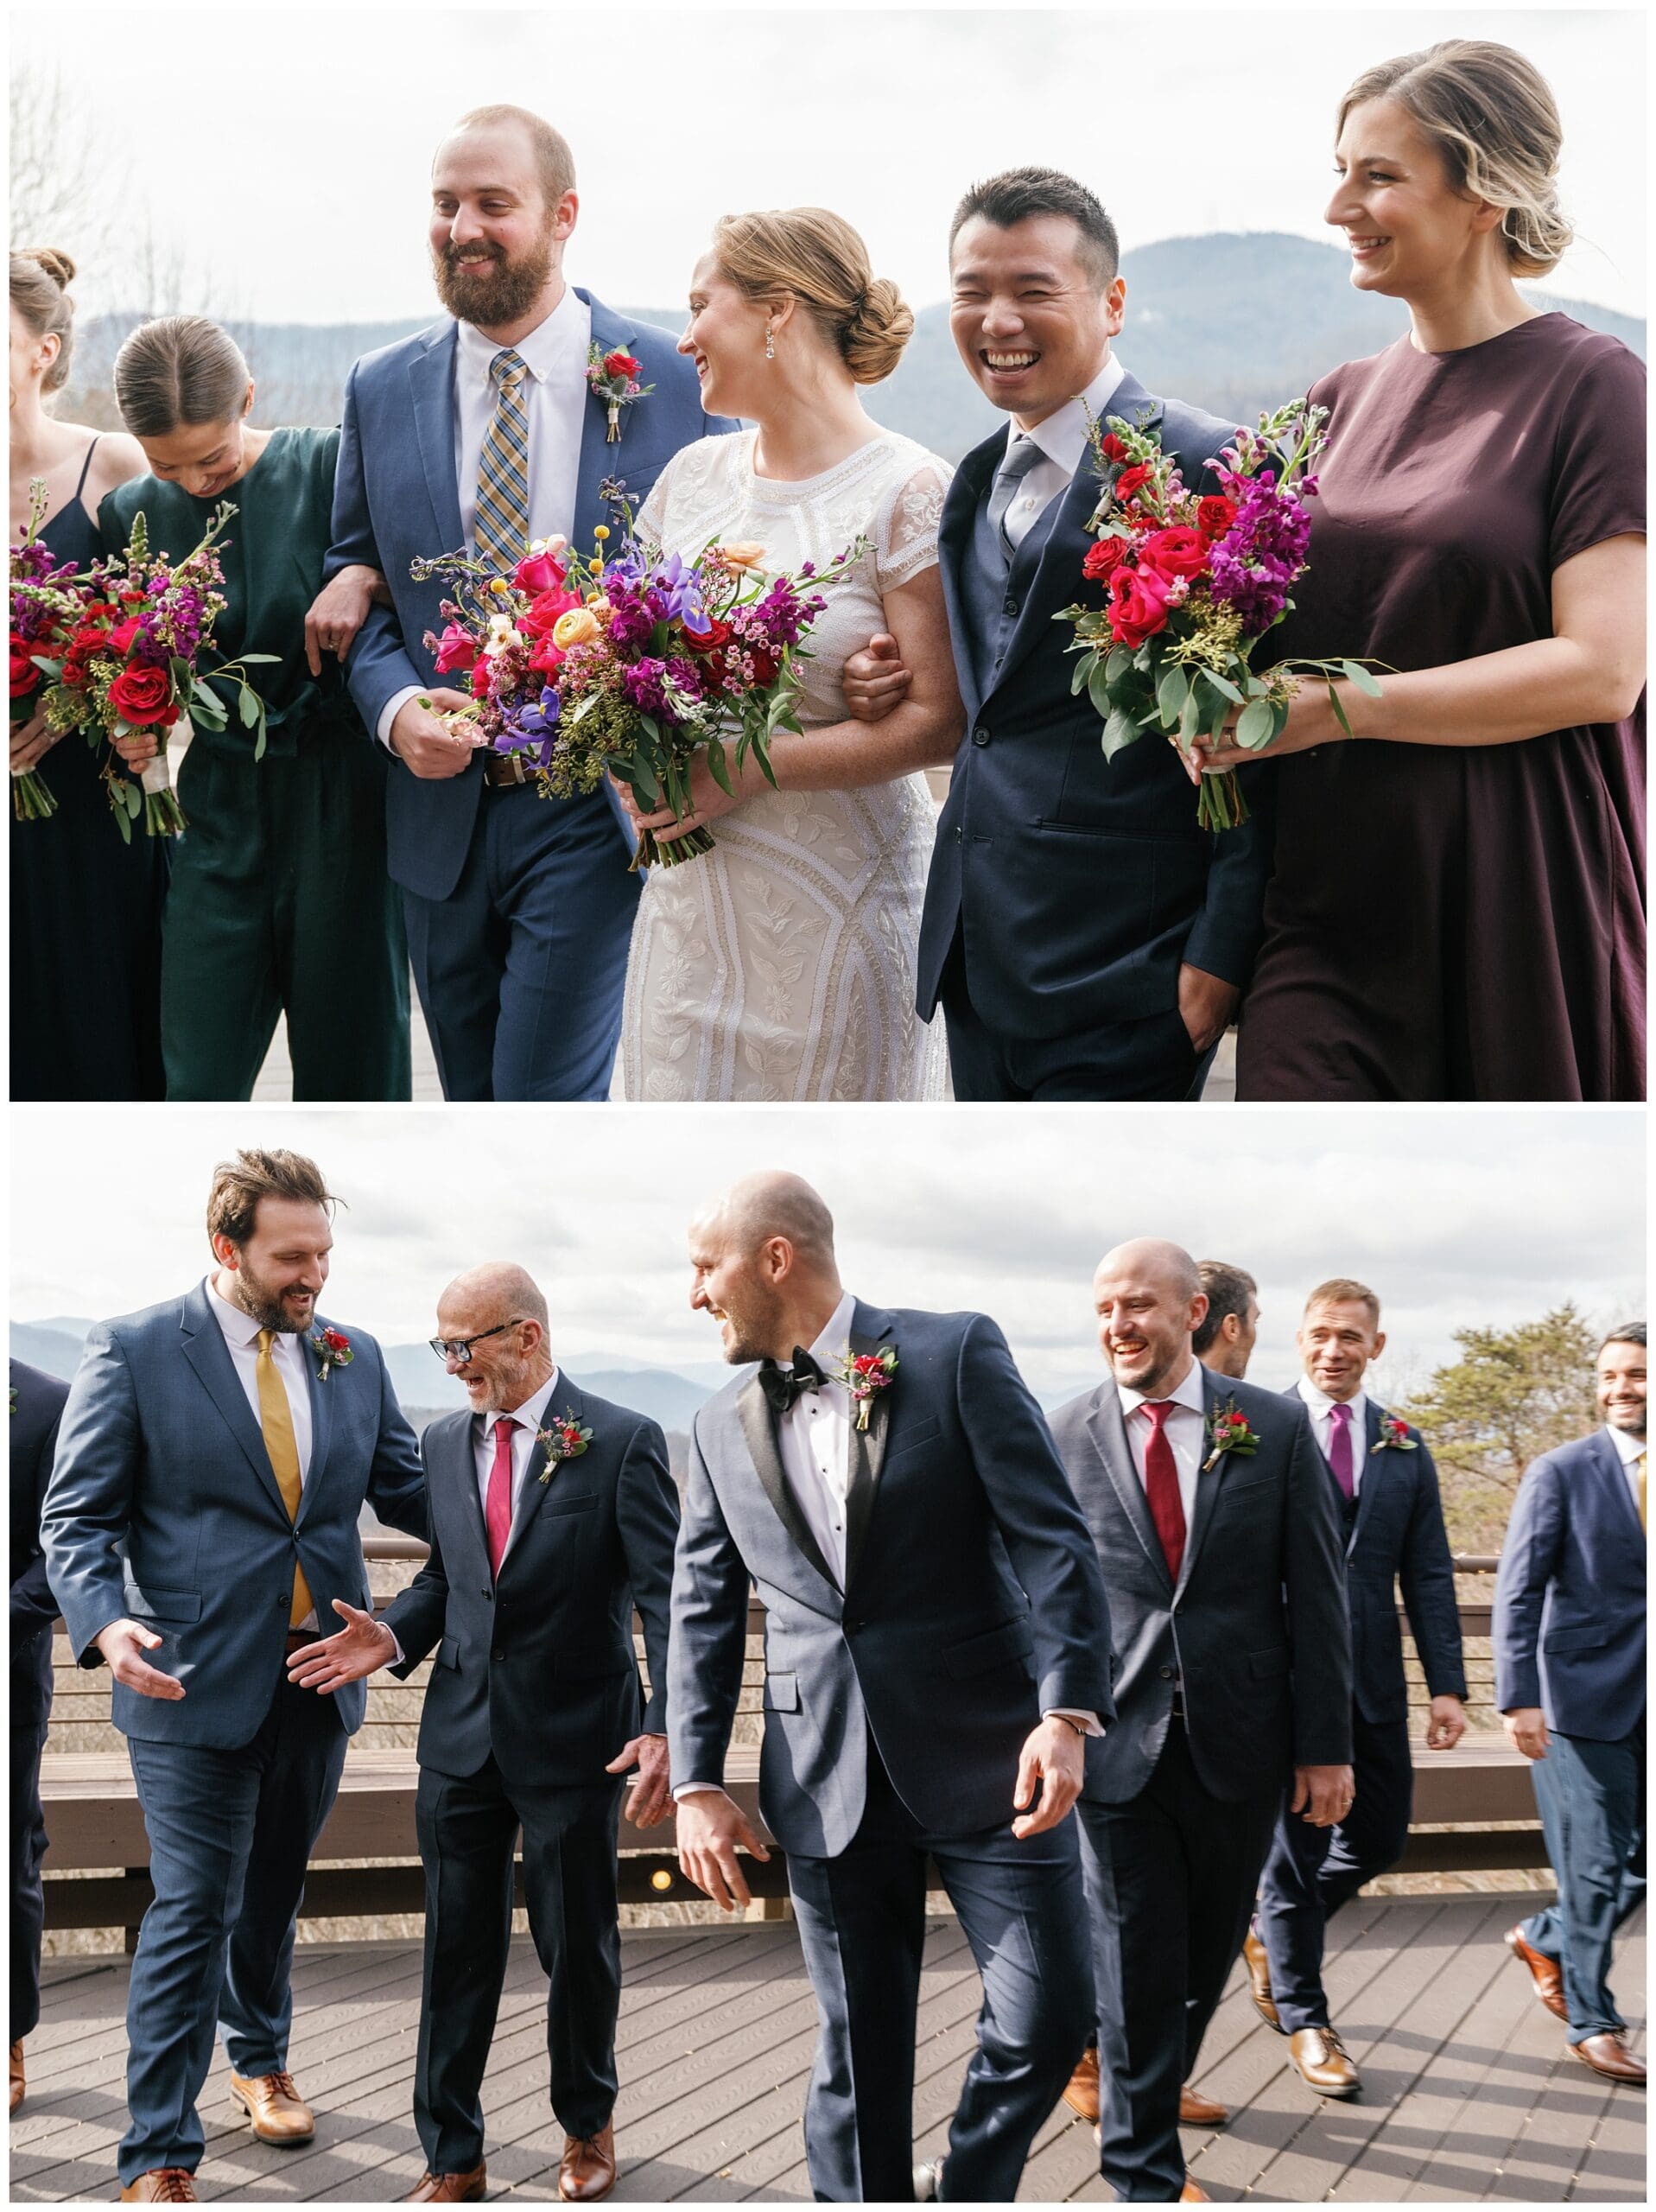 A group of bridesmaids and groomsmen walking together.